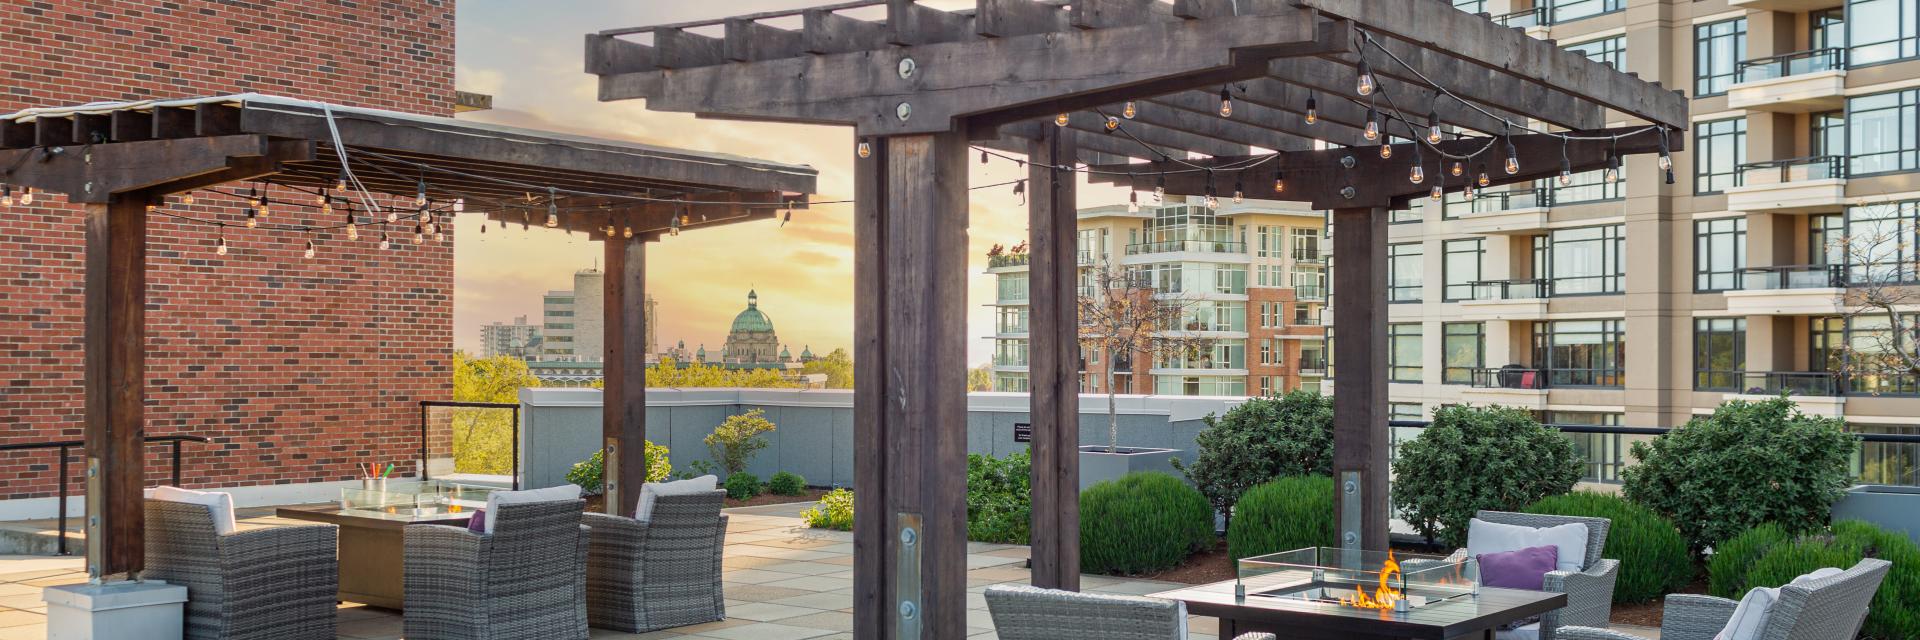 The Parkside Hotel & Spa Rooftop